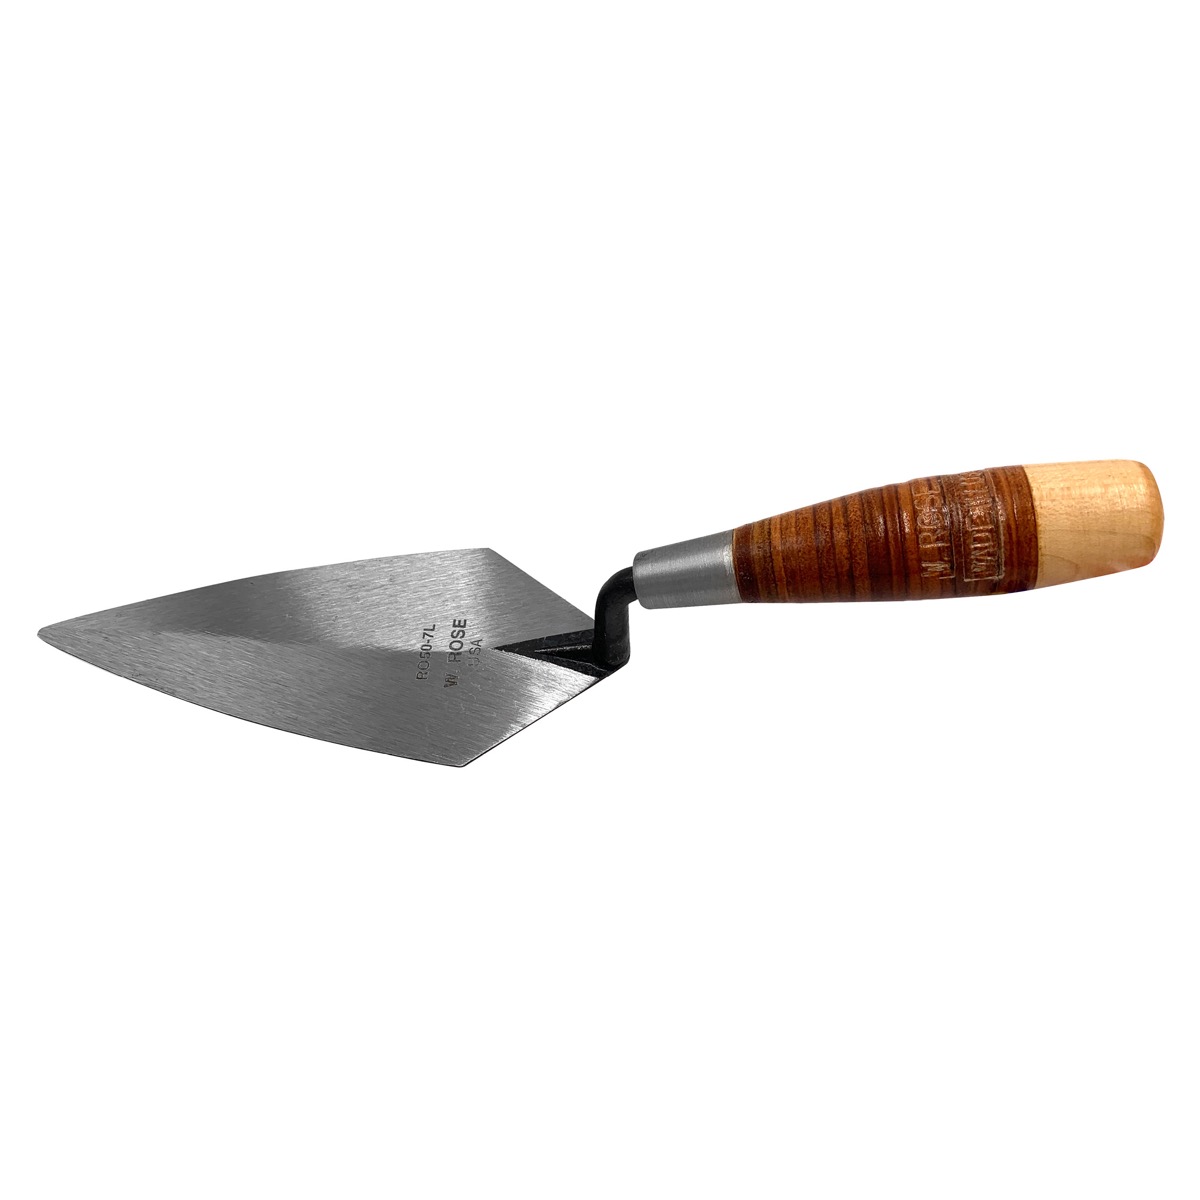 Rose Pointing Trowel 7" x 3¼" leather